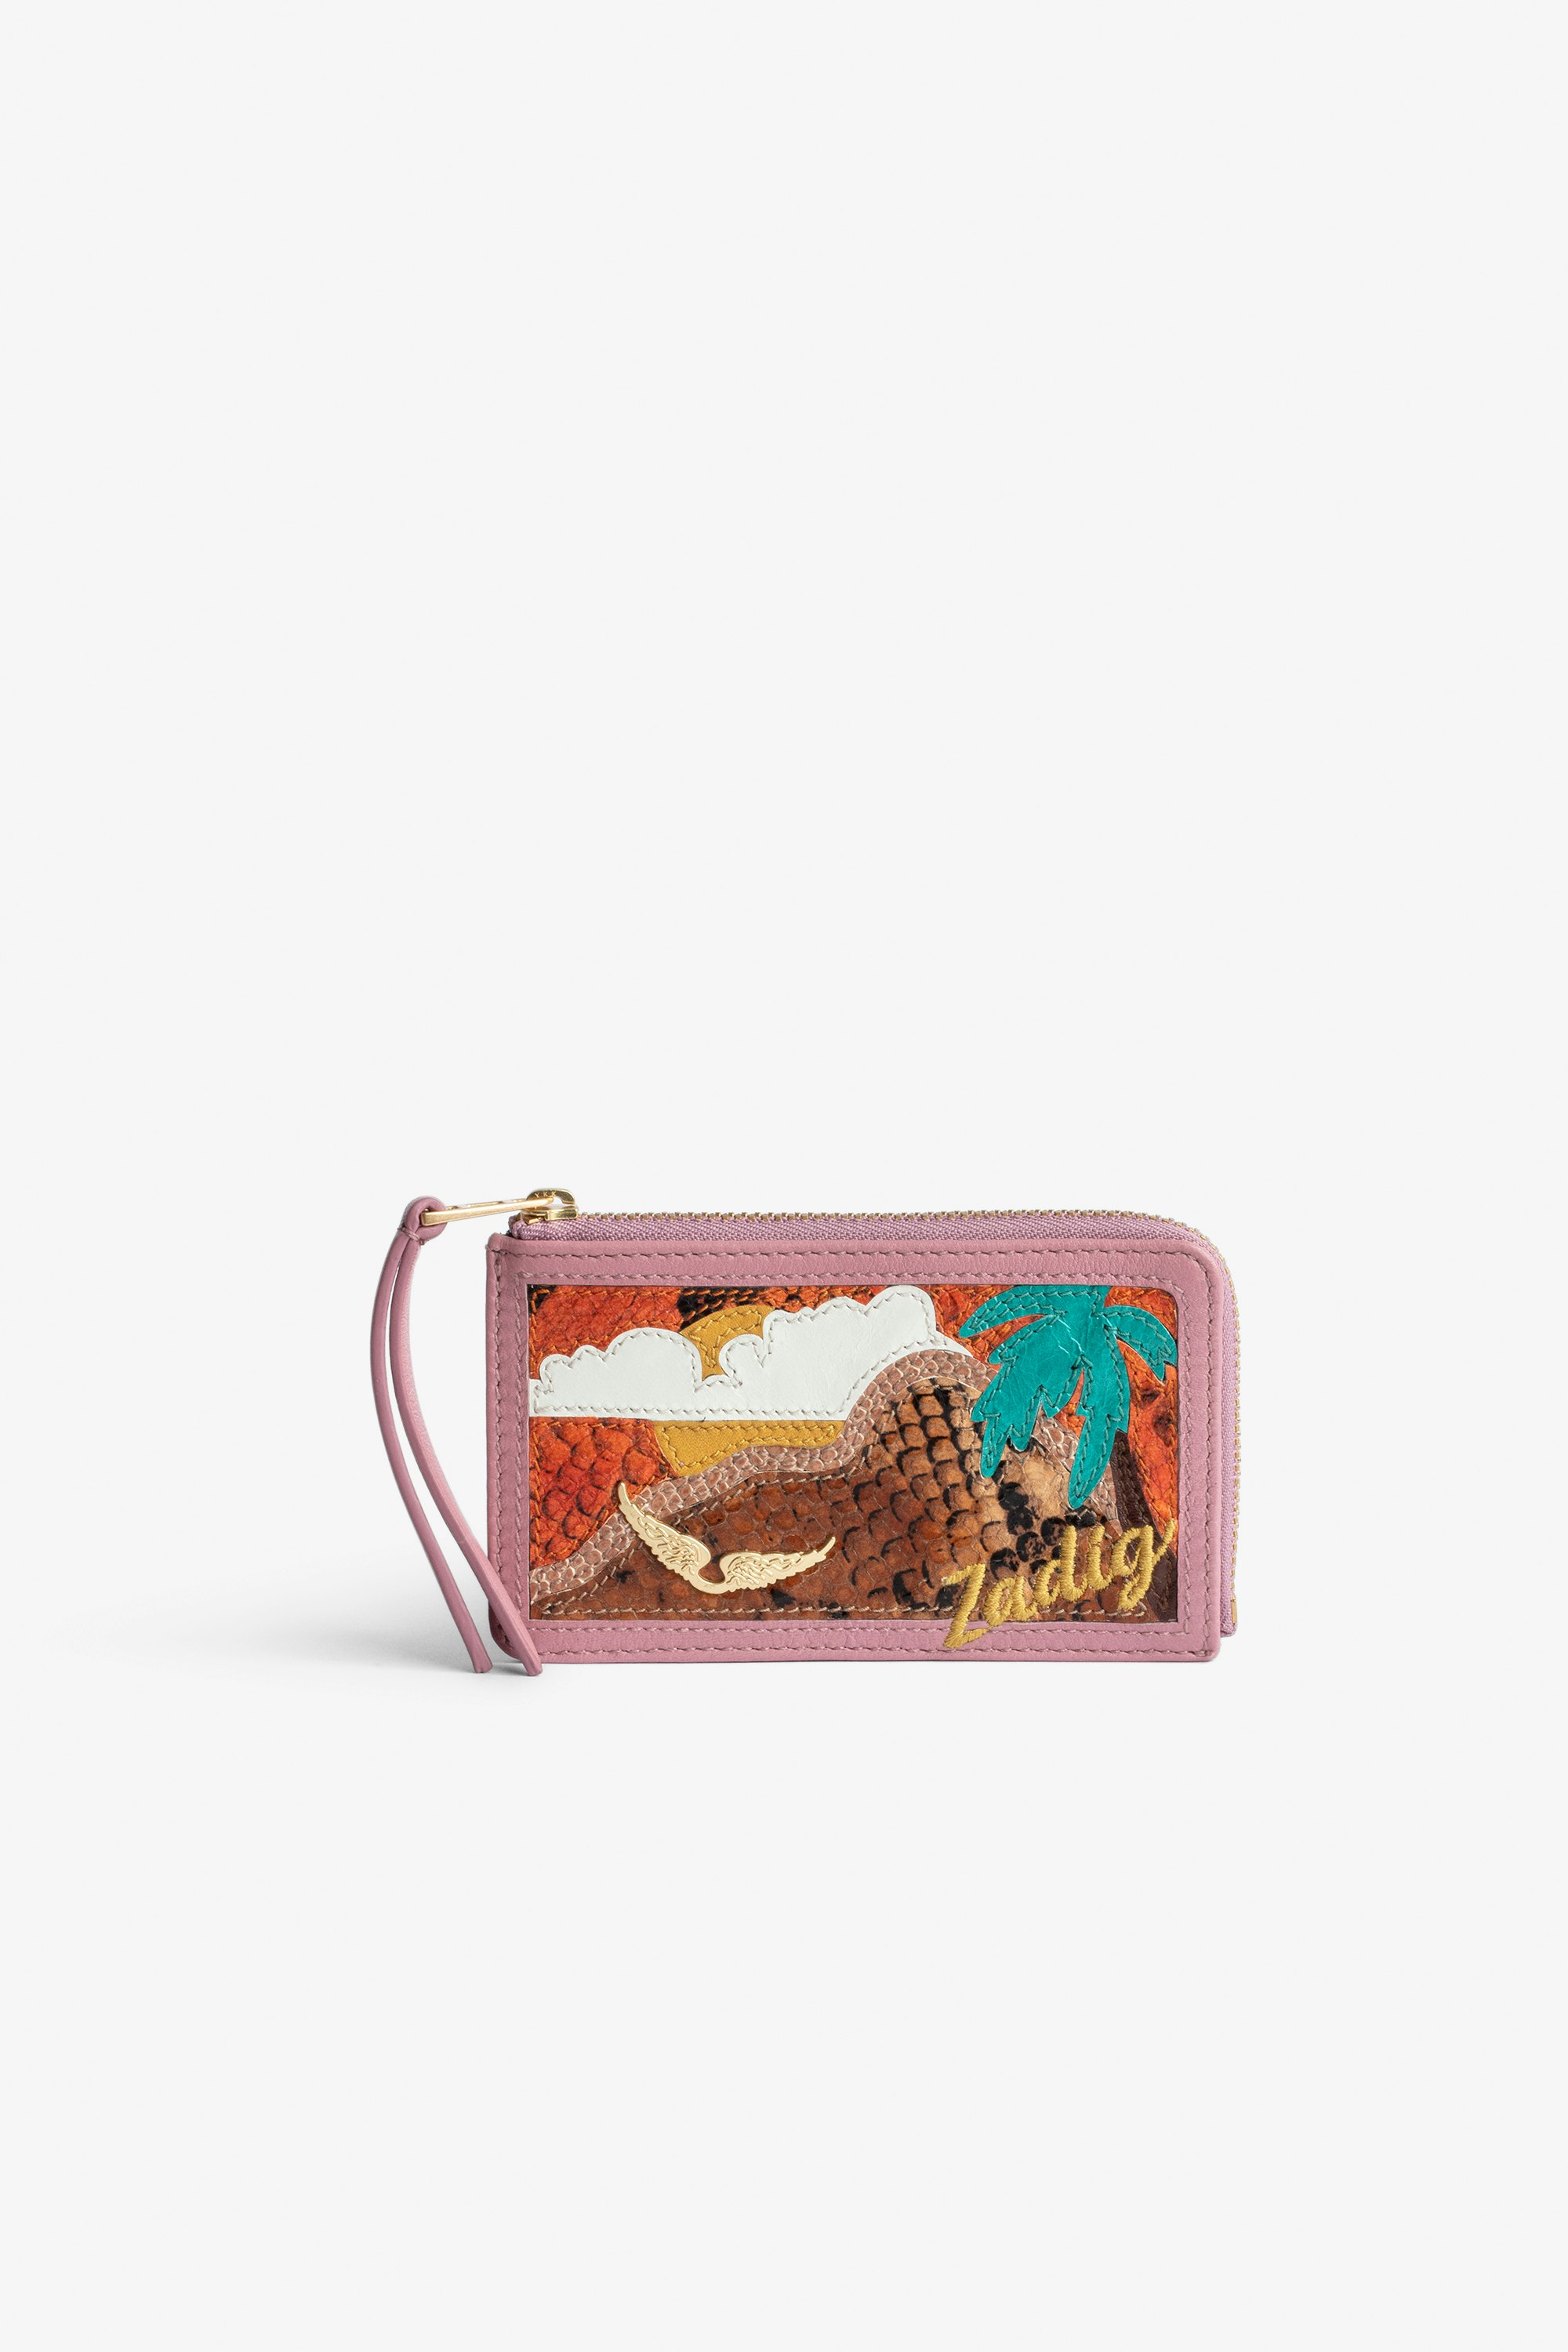 ZV Card Case Women's card case in pink leather with island motif